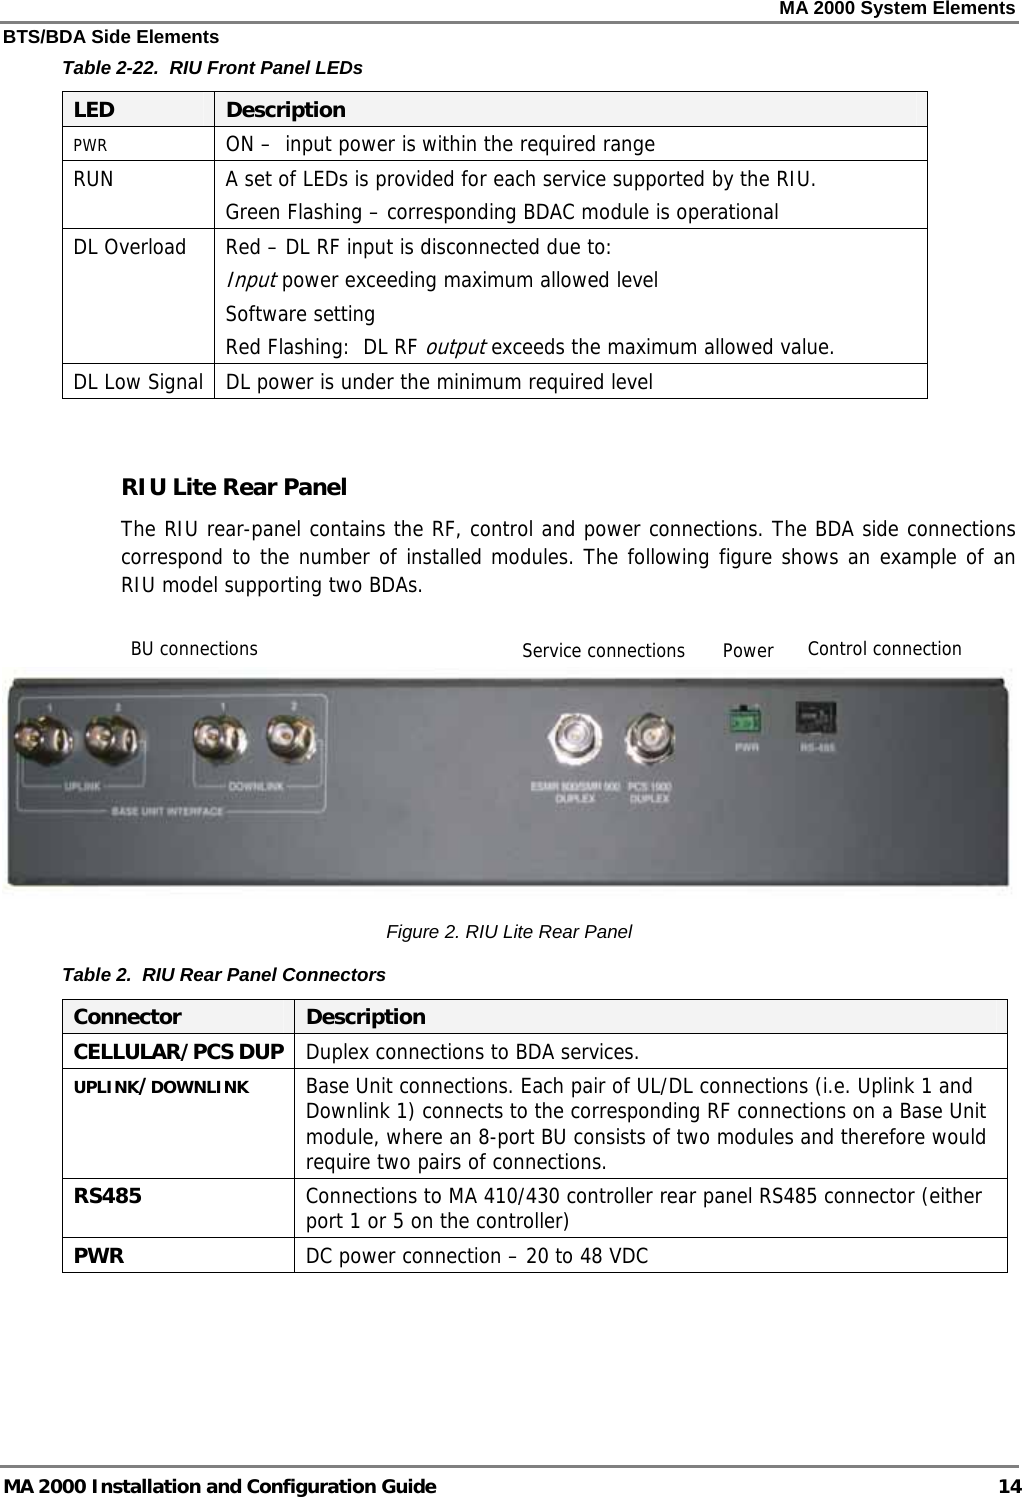 MA 2000 System Elements BTS/BDA Side Elements MA 2000 Installation and Configuration Guide  14 Table  2-2 2.  RIU Front Panel LEDs LED  Description PWR  ON –  input power is within the required range RUN  A set of LEDs is provided for each service supported by the RIU.  Green Flashing – corresponding BDAC module is operational DL Overload  Red – DL RF input is disconnected due to:  Input power exceeding maximum allowed level  Software setting Red Flashing:  DL RF output exceeds the maximum allowed value. DL Low Signal  DL power is under the minimum required level  RIU Lite Rear Panel The RIU rear-panel contains the RF, control and power connections. The BDA side connections correspond to the number of installed modules. The following figure shows an example of an RIU model supporting two BDAs.   Figure  2. RIU Lite Rear Panel Table  2.  RIU Rear Panel Connectors Connector  Description CELLULAR/PCS DUP  Duplex connections to BDA services.  UPLINK/DOWNLINK Base Unit connections. Each pair of UL/DL connections (i.e. Uplink 1 and Downlink 1) connects to the corresponding RF connections on a Base Unit module, where an 8-port BU consists of two modules and therefore would require two pairs of connections. RS485  Connections to MA 410/430 controller rear panel RS485 connector (either port 1 or 5 on the controller) PWR  DC power connection – 20 to 48 VDC  Service connections Control connectionBU connections  Power 